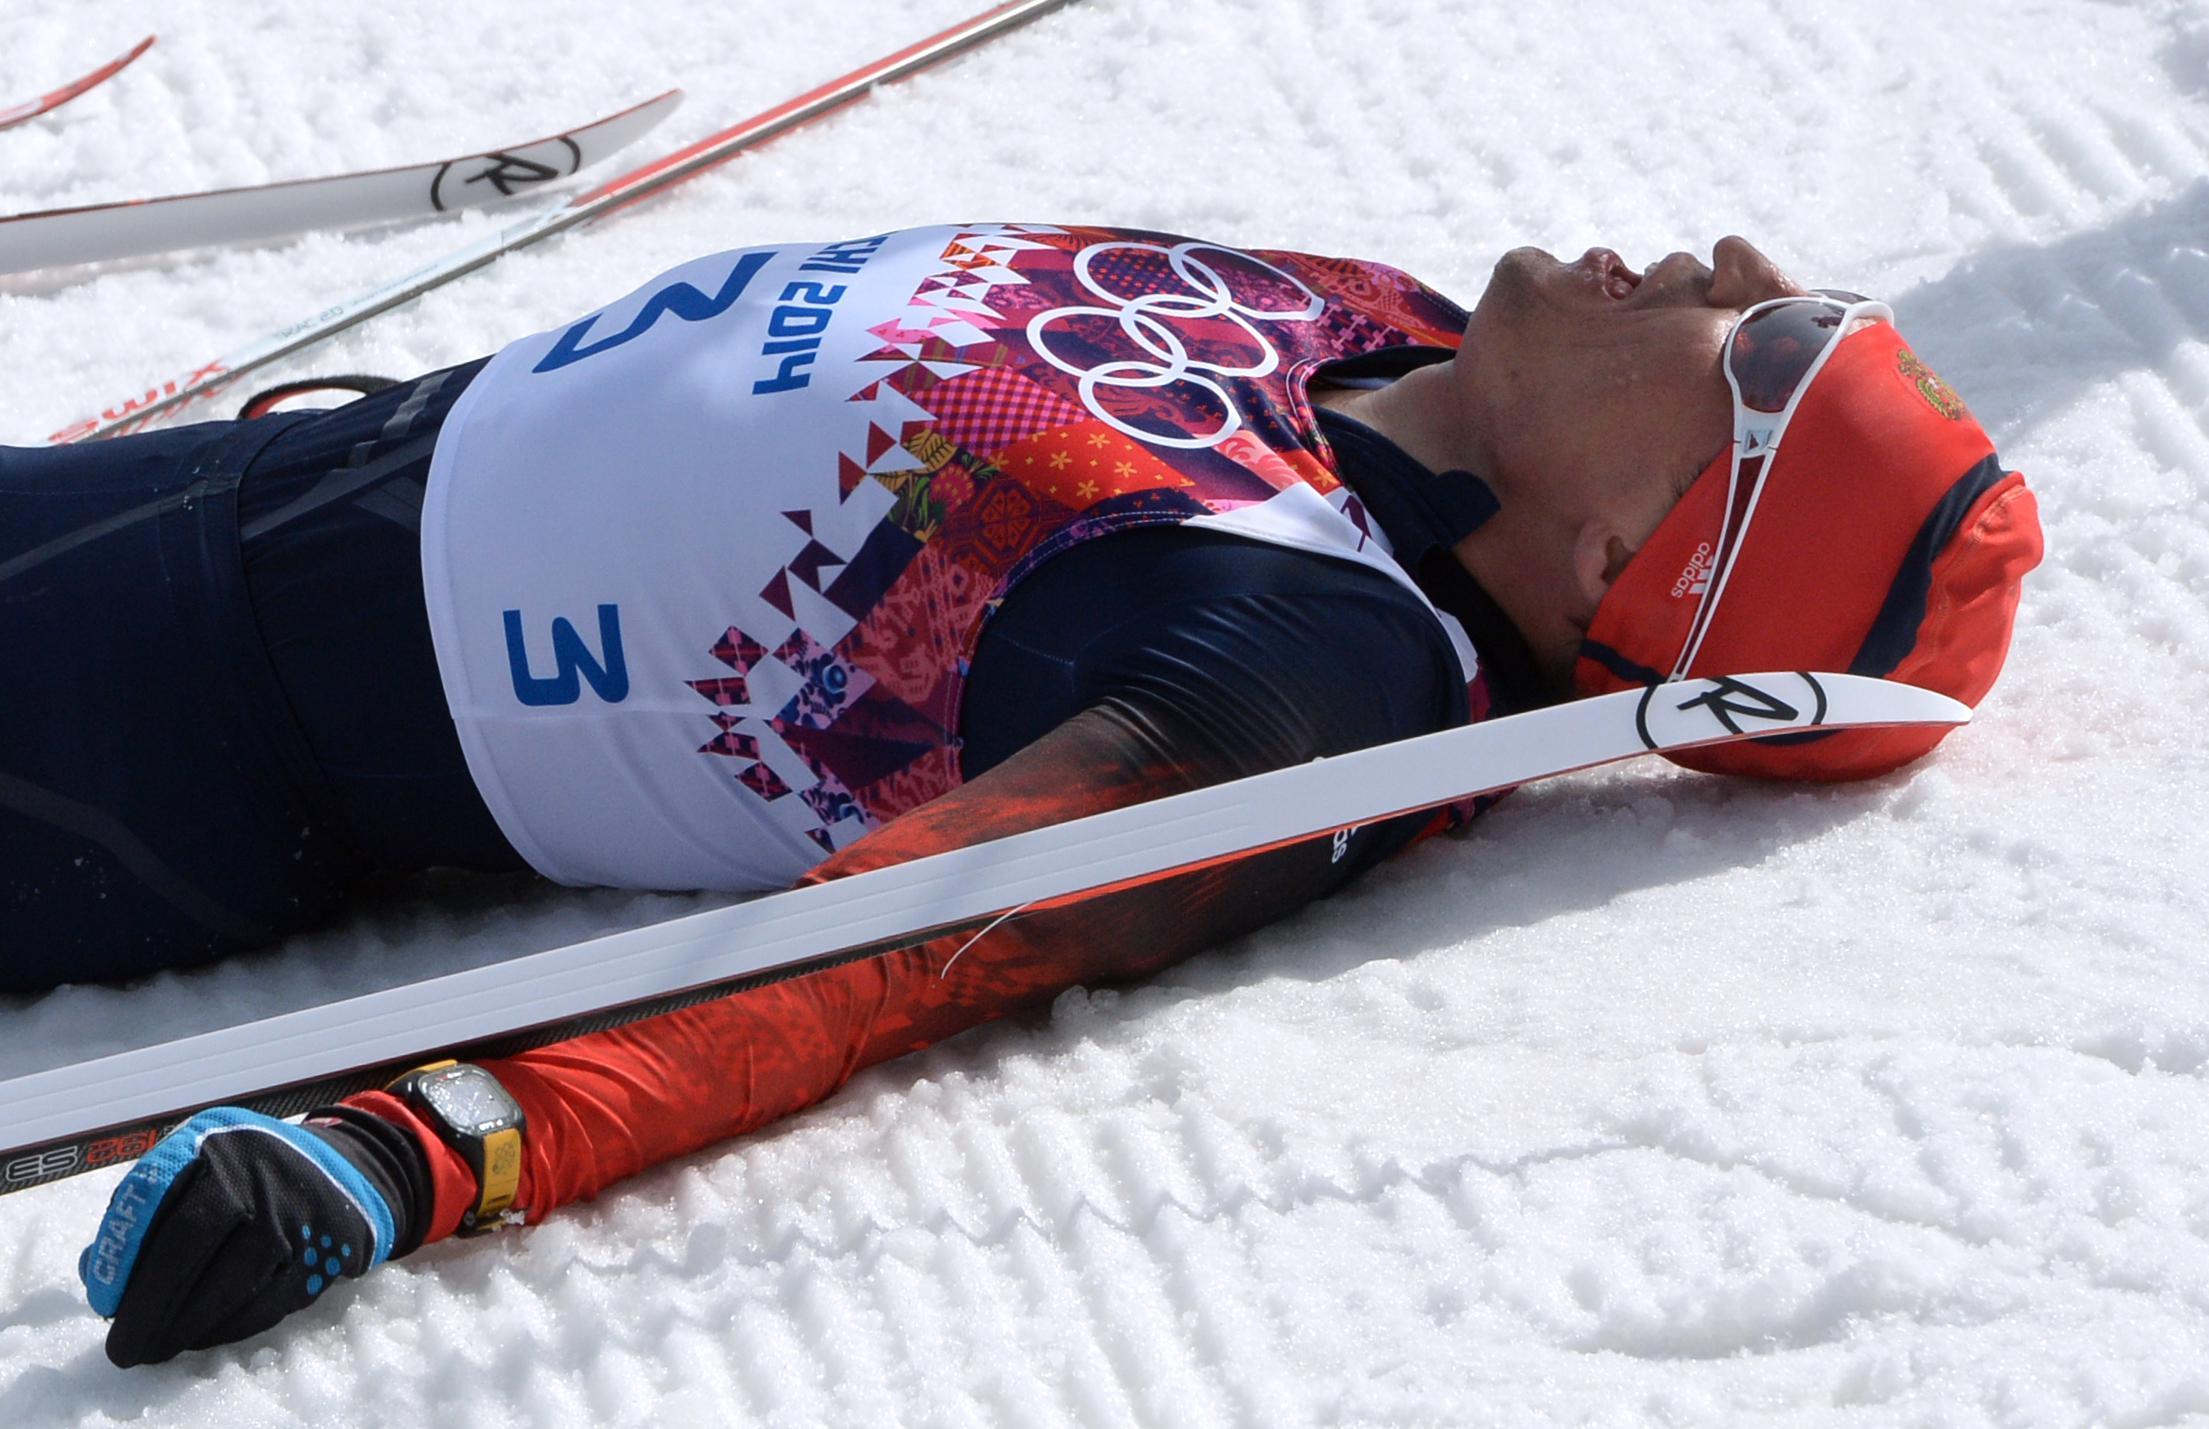 Russian skier Alexander Legkov gold medalist wallpapers and images ...